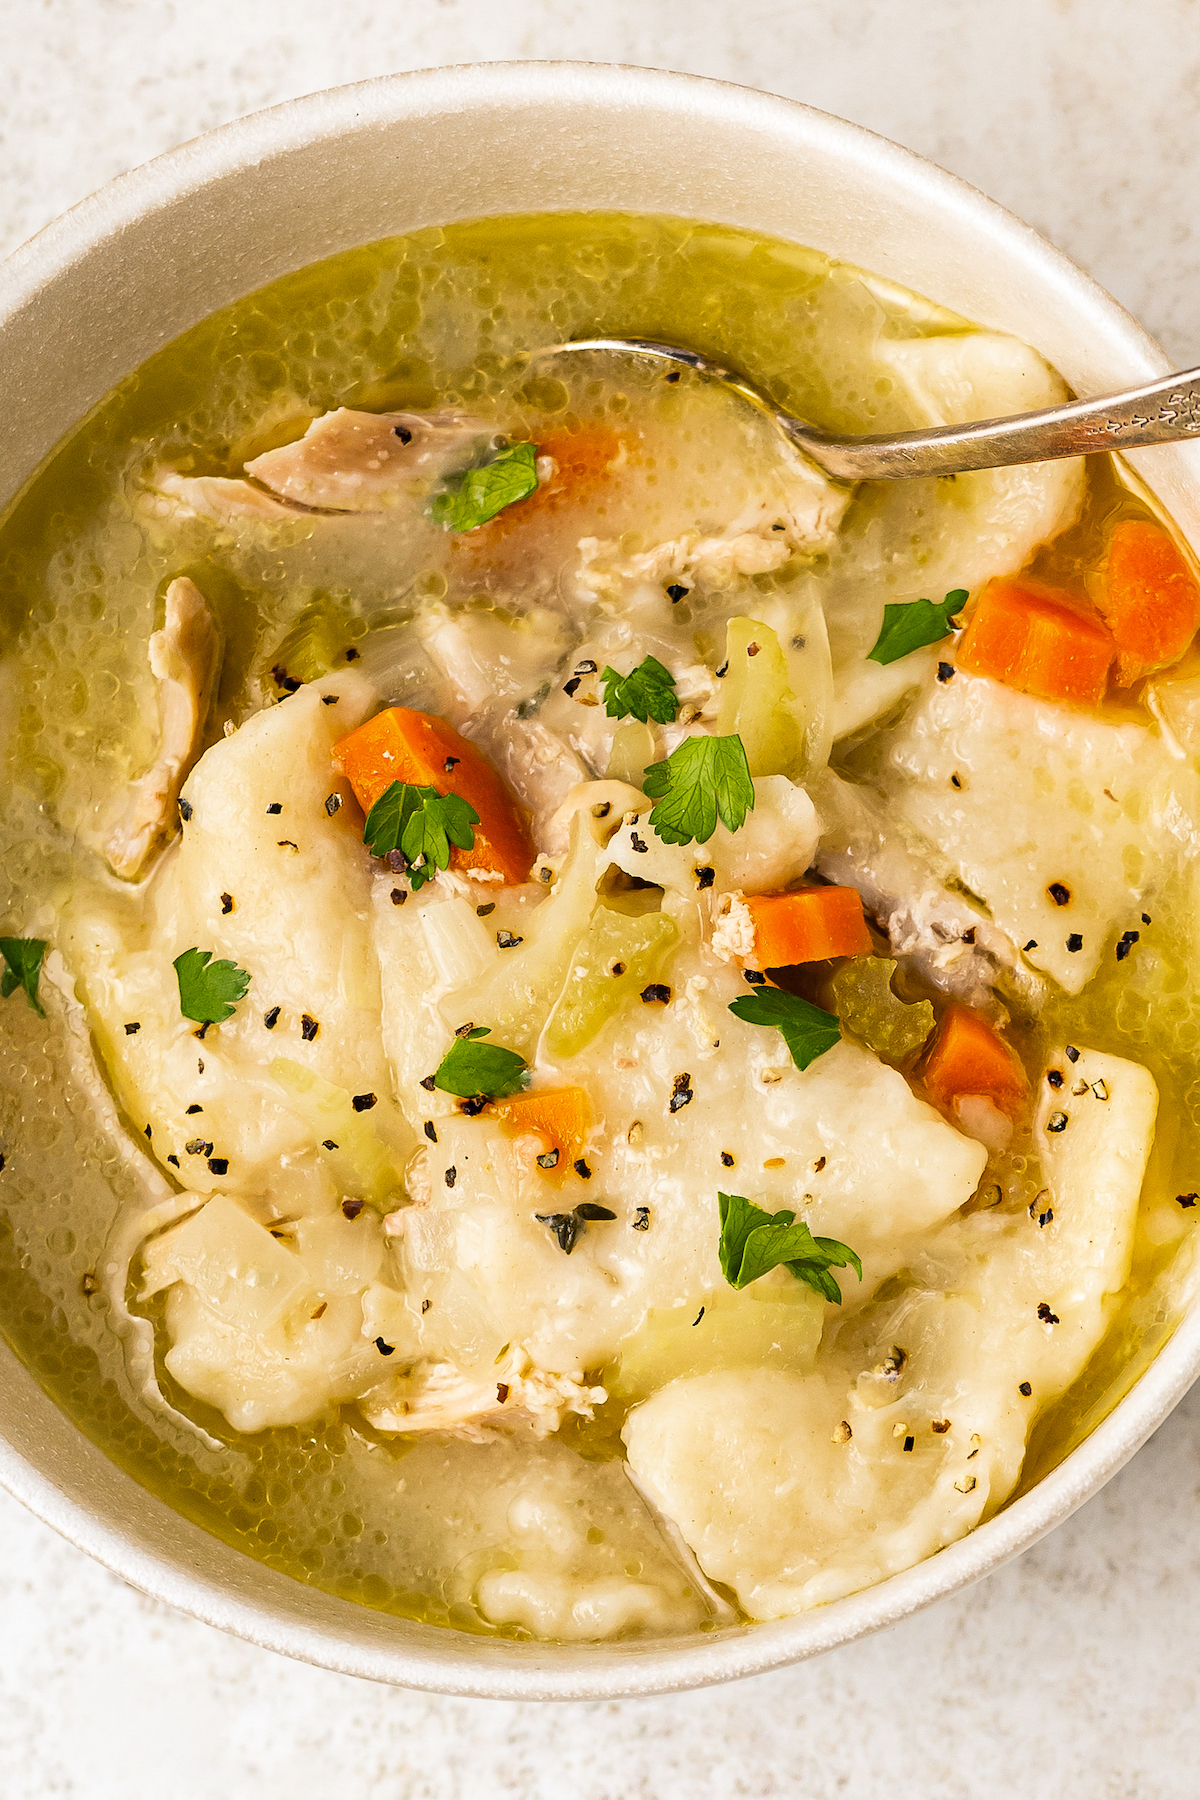 A spoon resting in a bowl of chicken soup with dumplings.